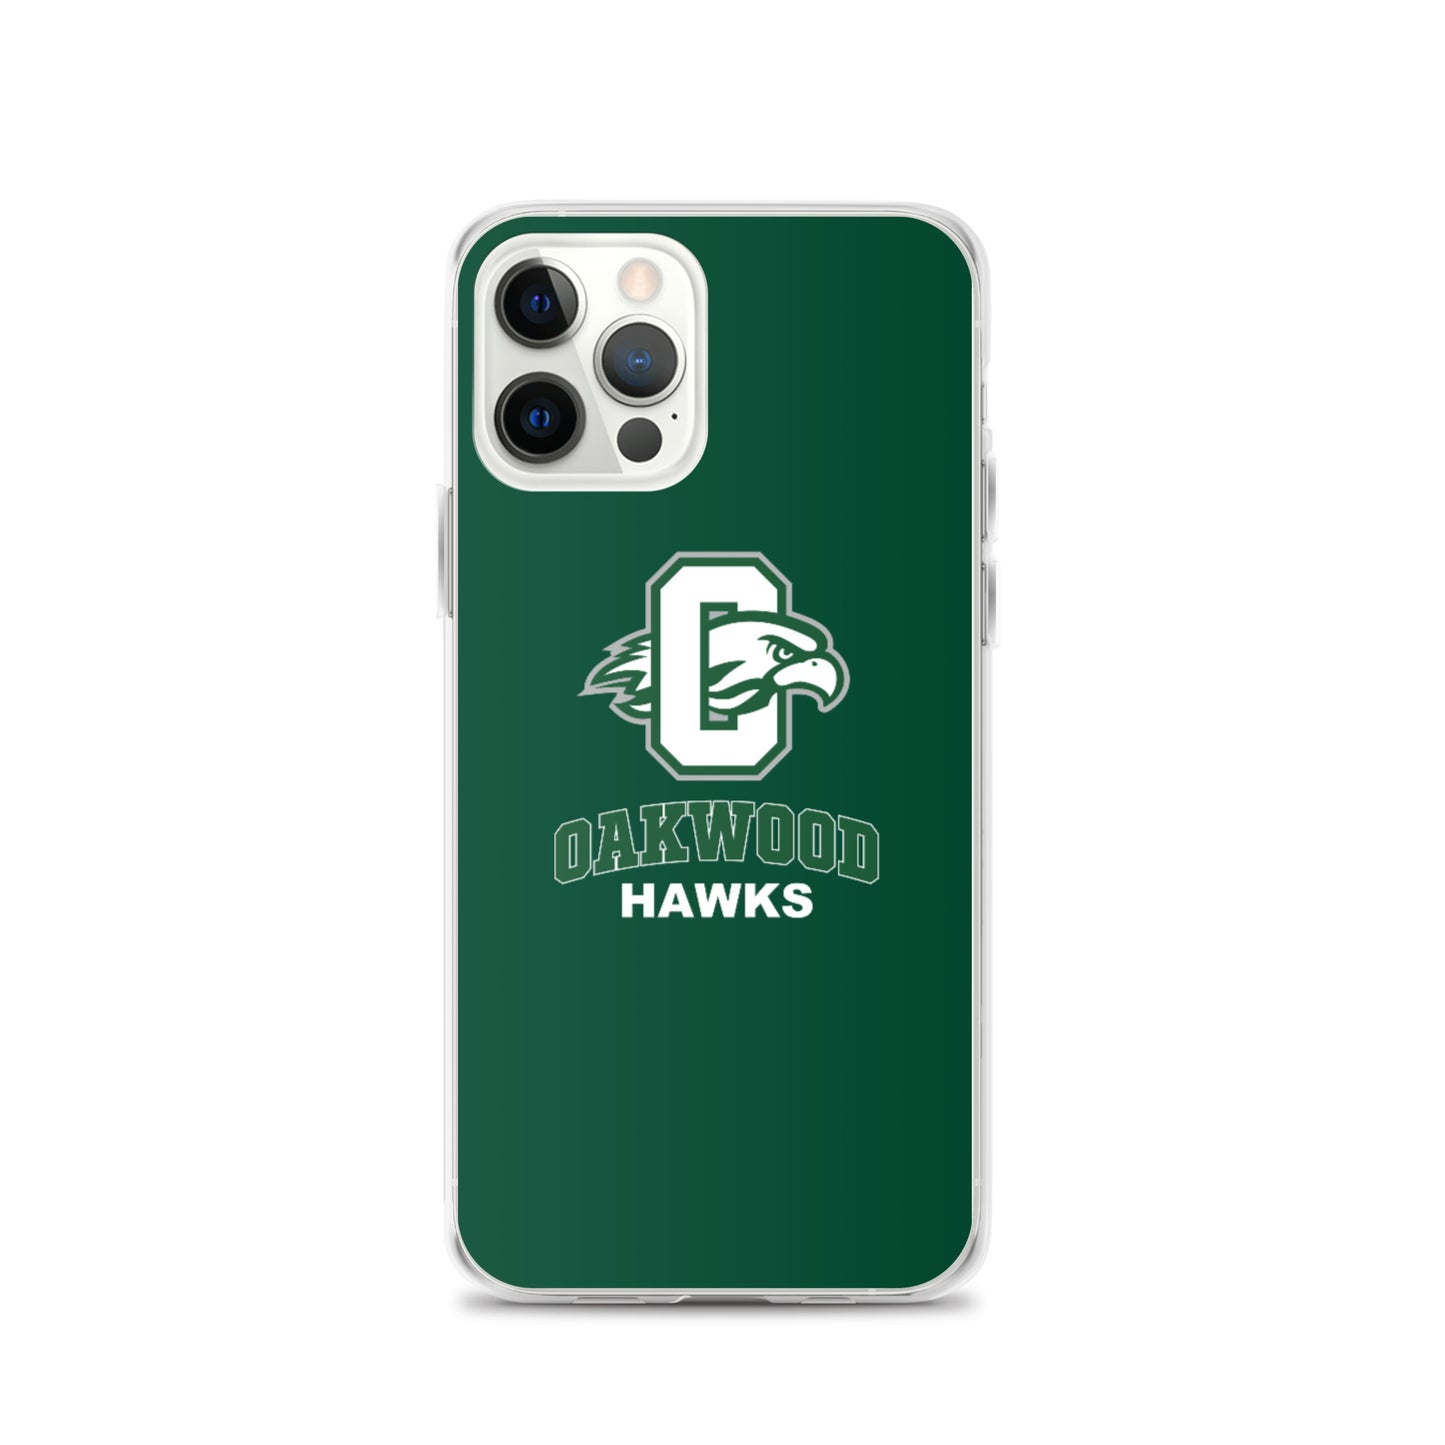 Green iPhone Case